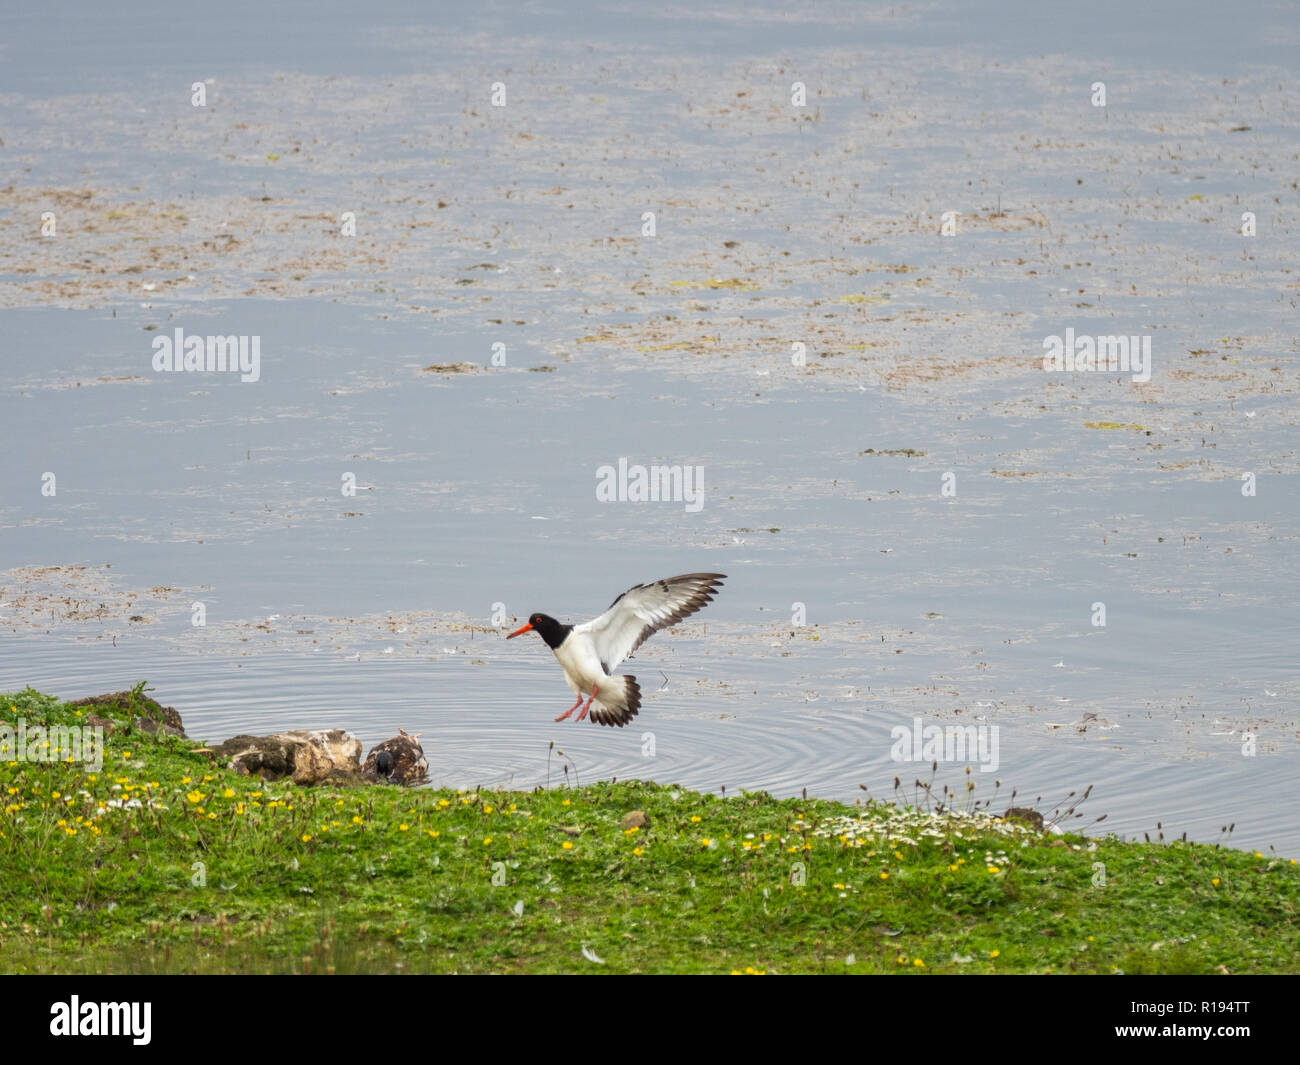 Oystercatcher coming in to land on grass bank Stock Photo